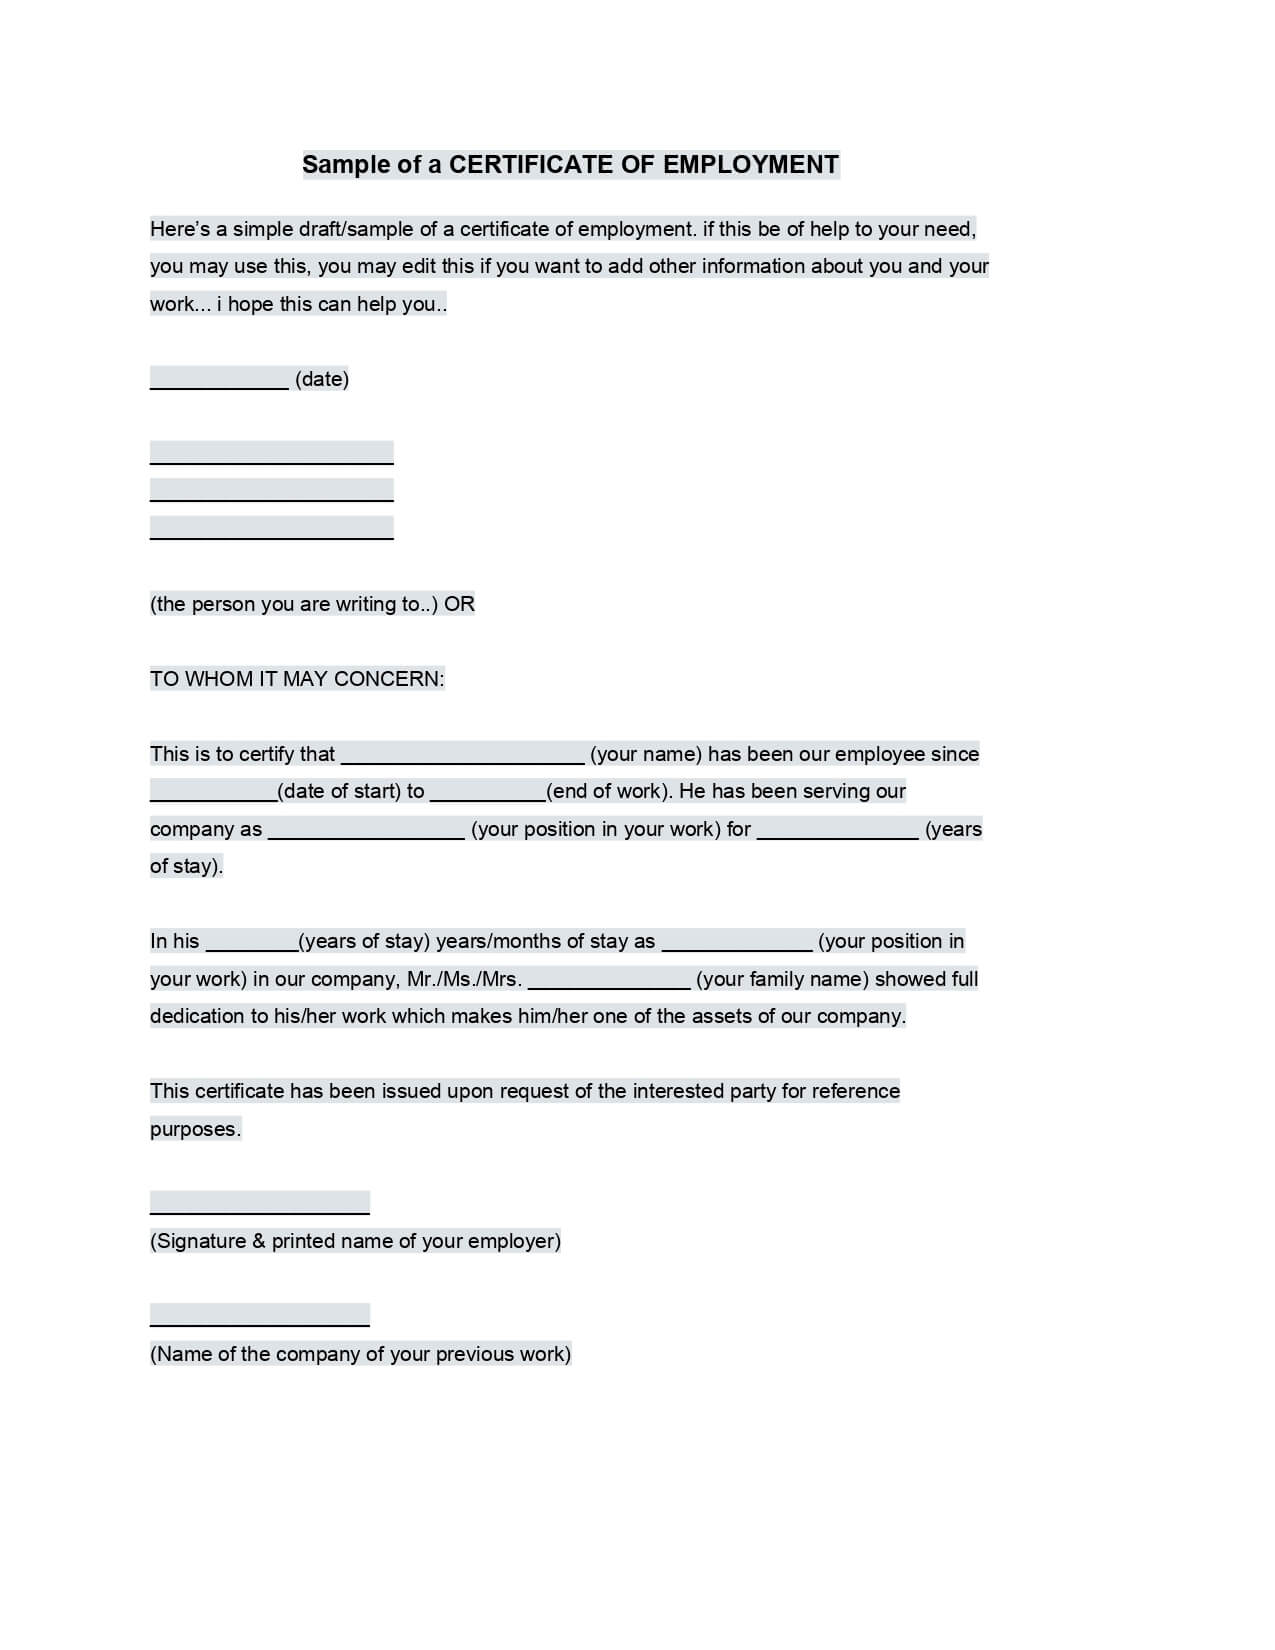 Sample Employment Certificate From Employer – Google Docs With Regard To Sample Certificate Employment Template